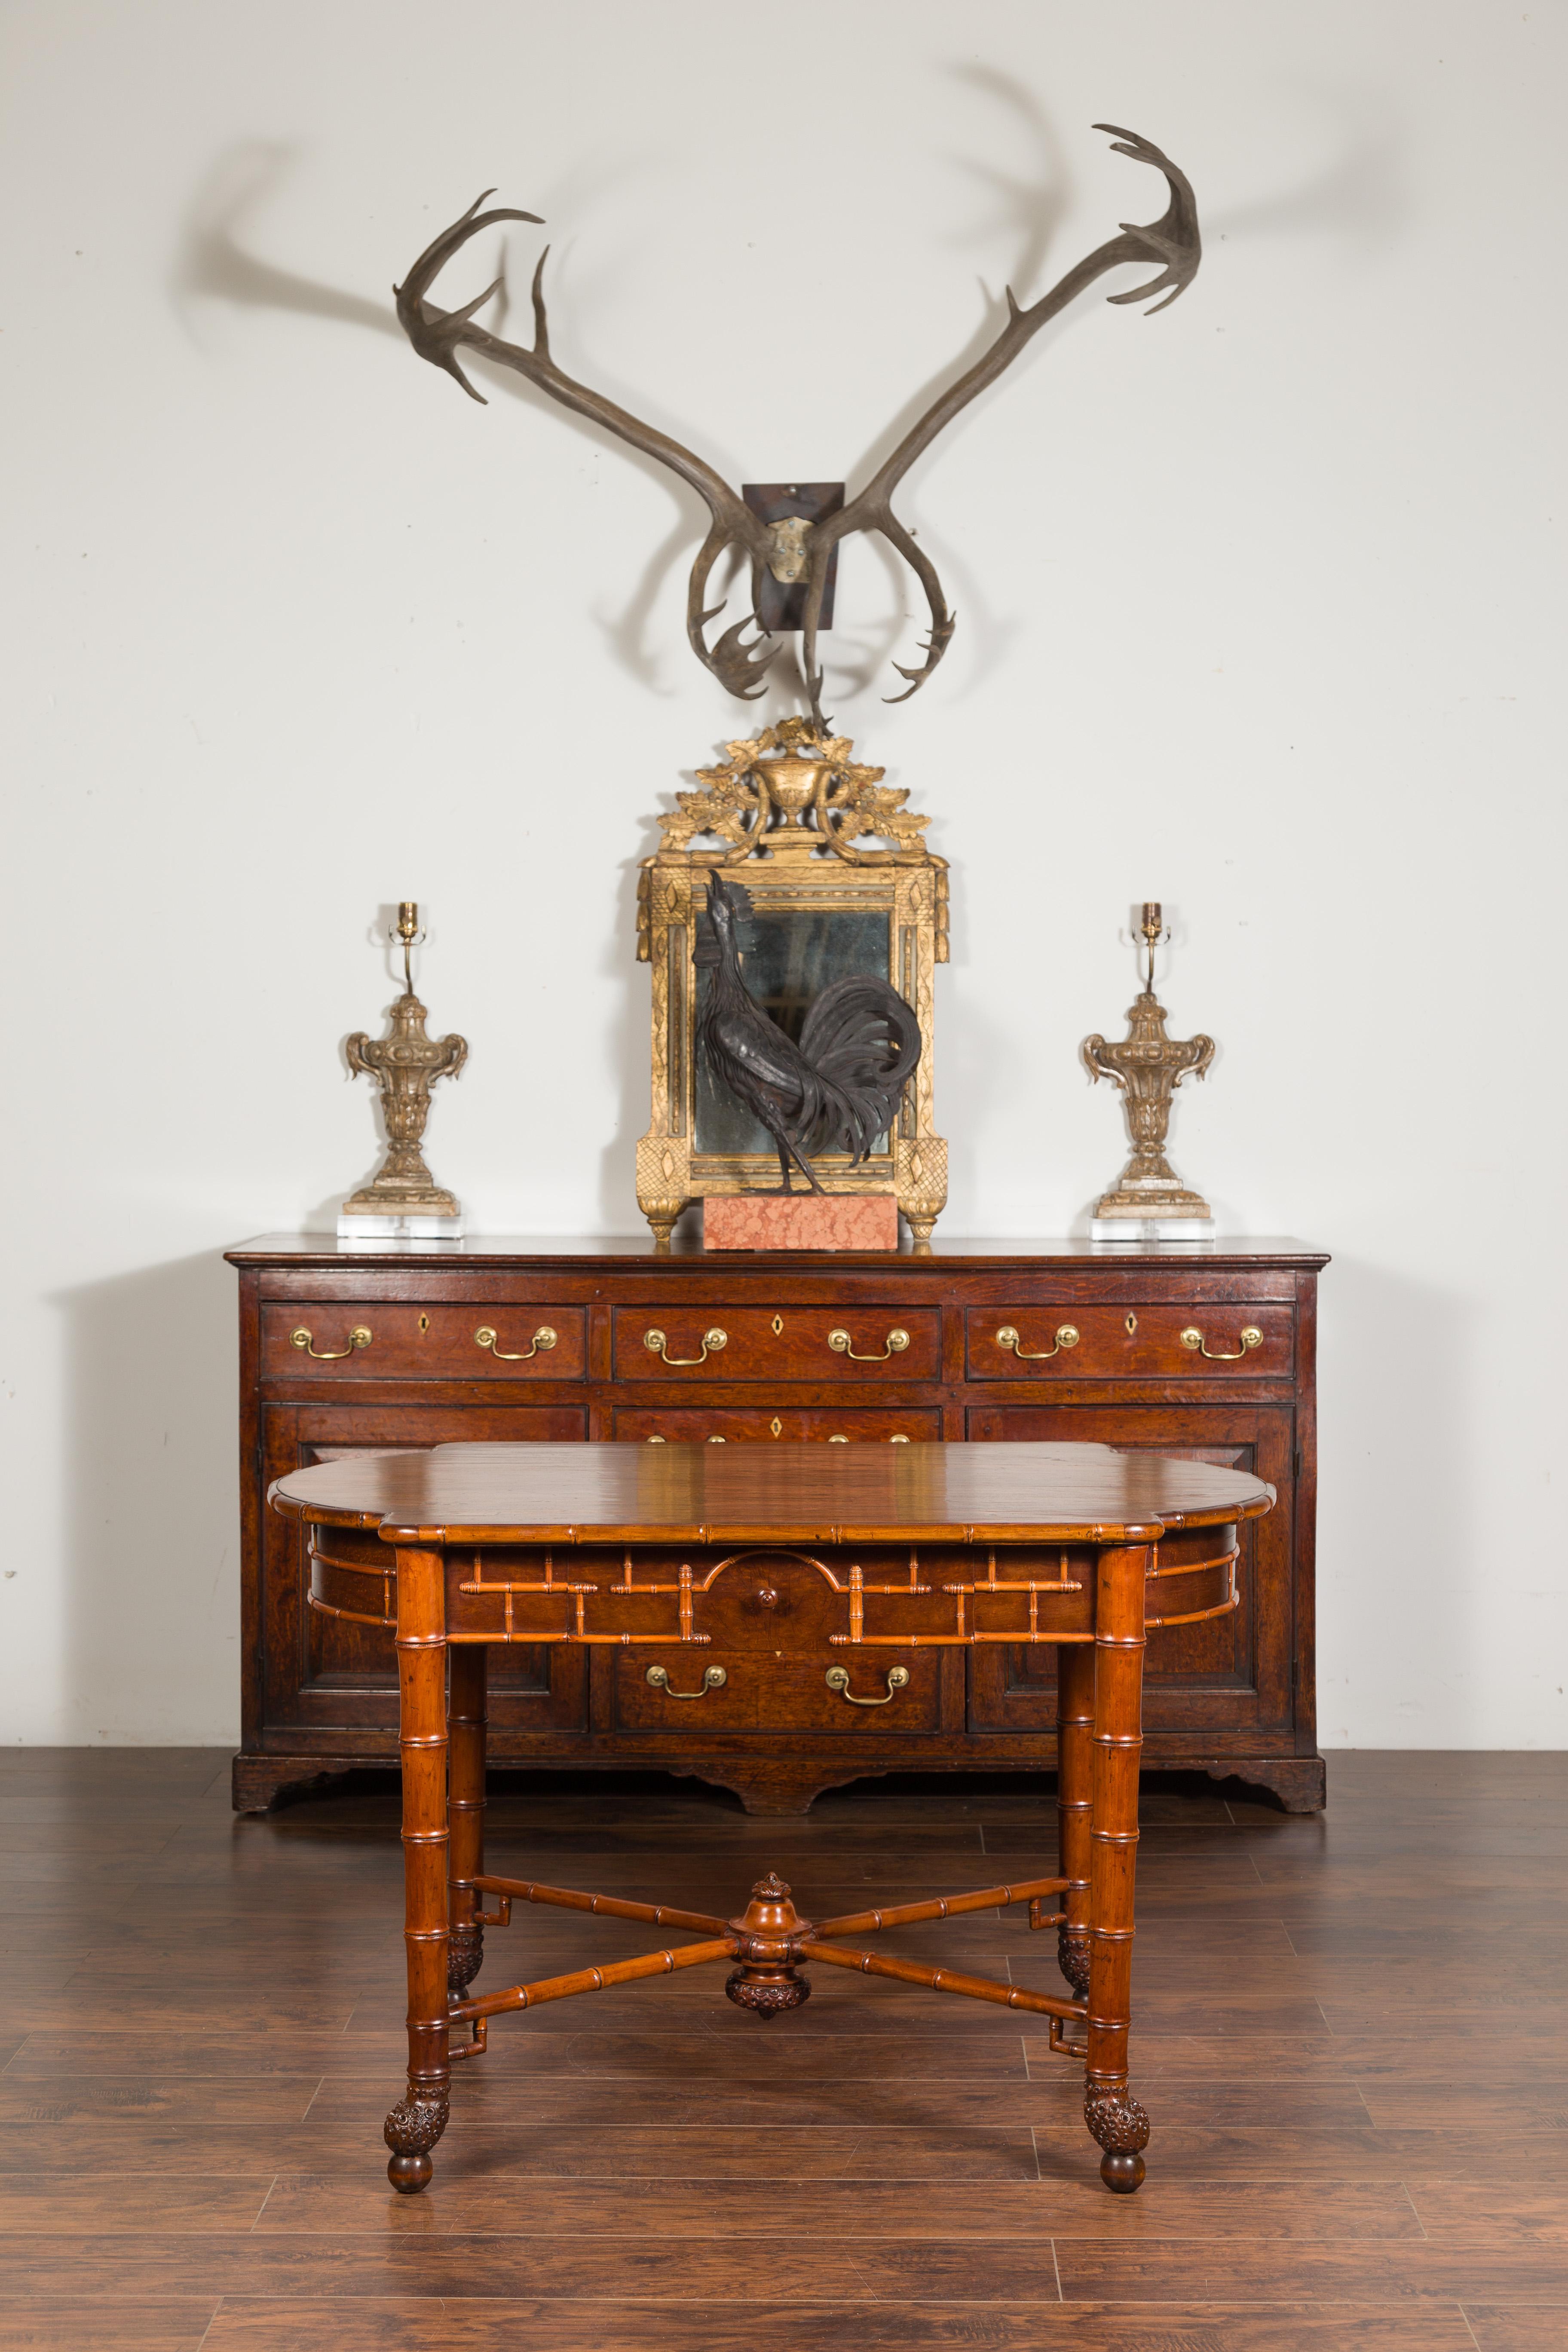 An English faux bamboo walnut desk from the late 19th century, with oval shaped top, two drawers and bamboo root style feet. Created in England during the third quarter of the 19th century, this walnut desk attracts our attention with its faux